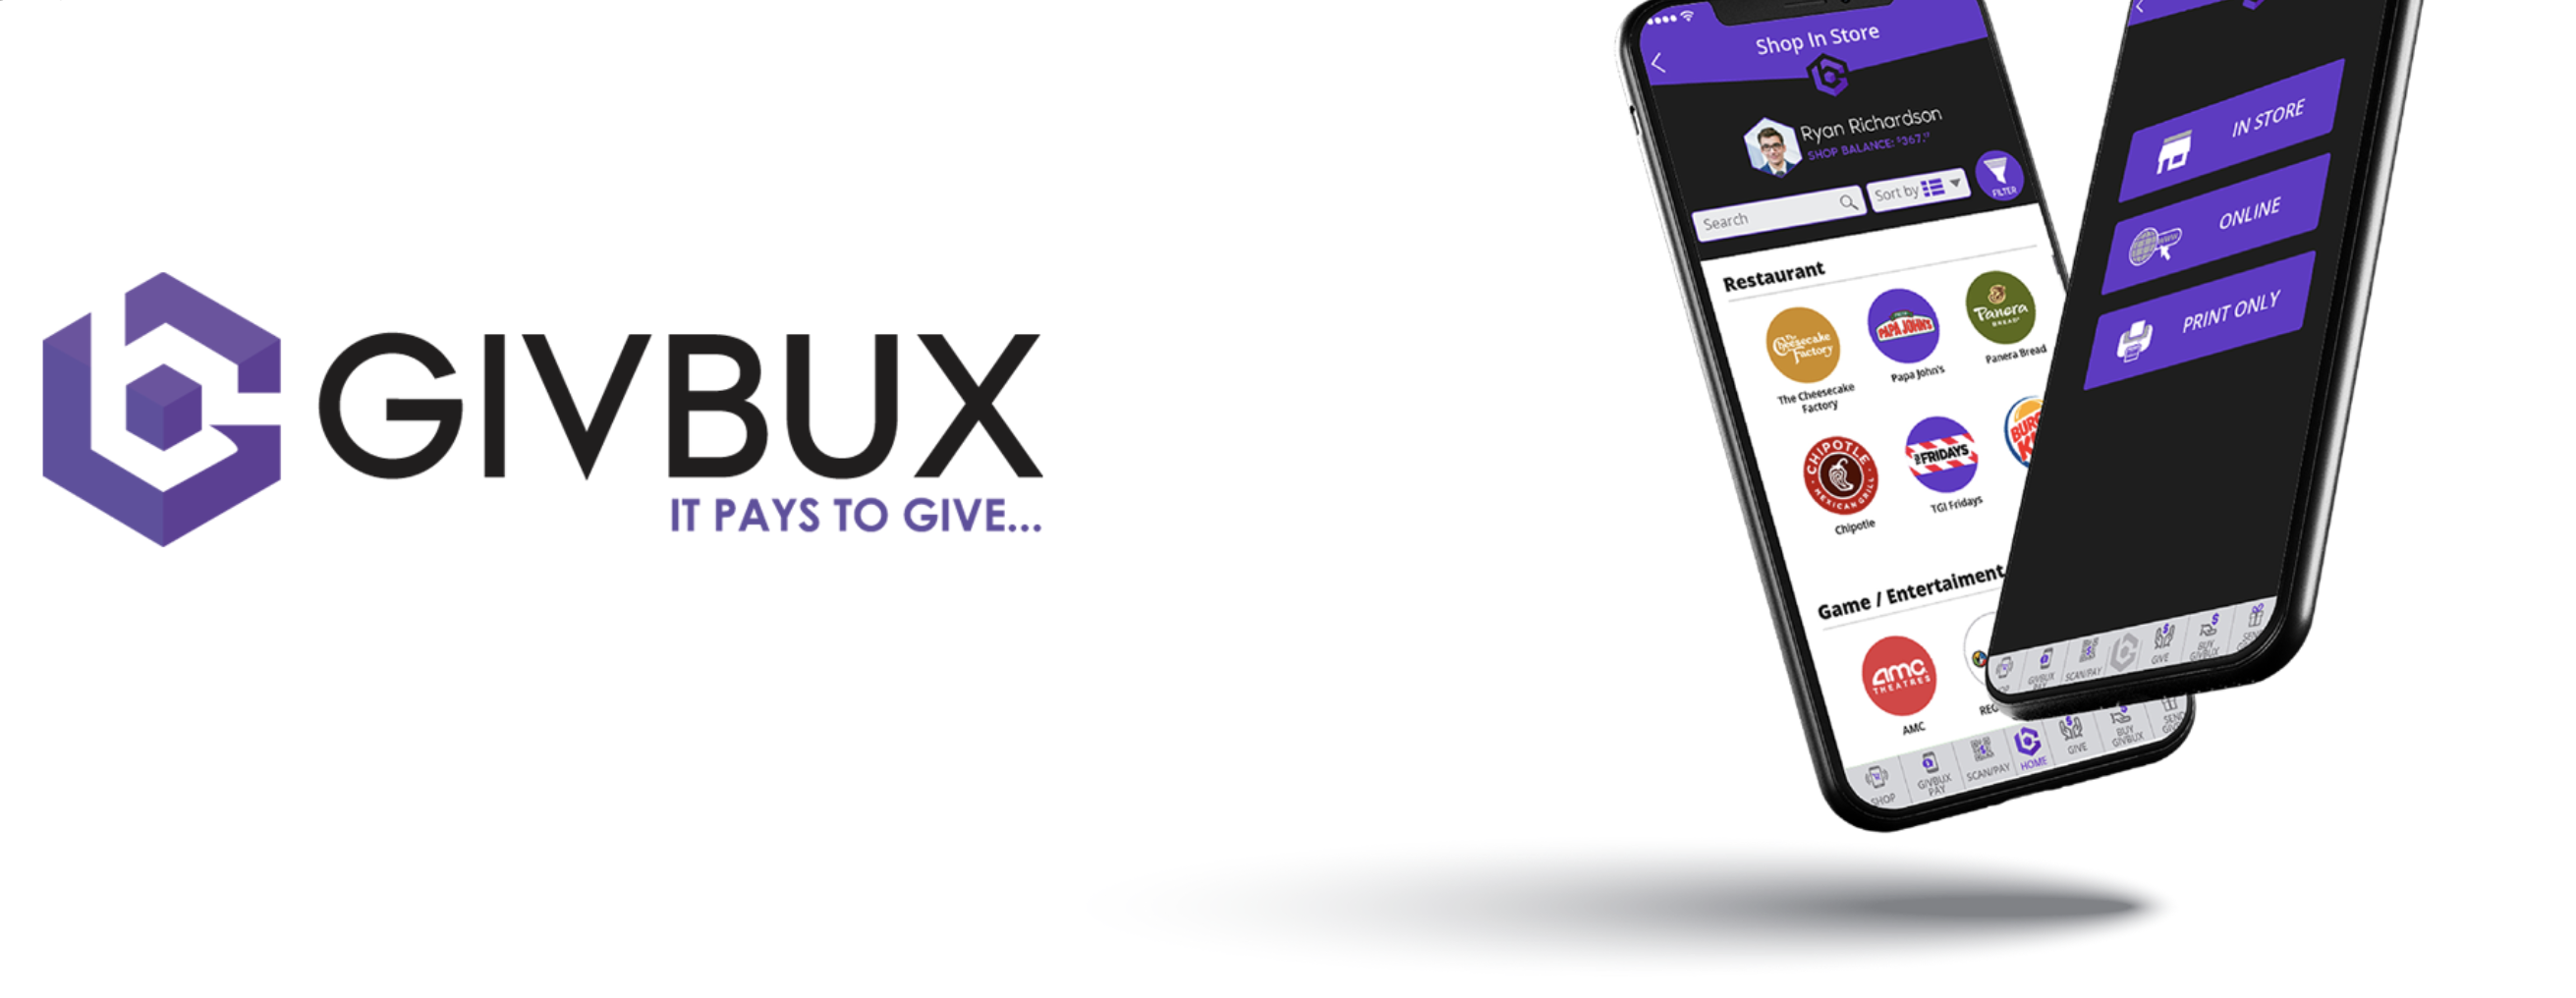 GIVE BACK WITH GIVBUX!